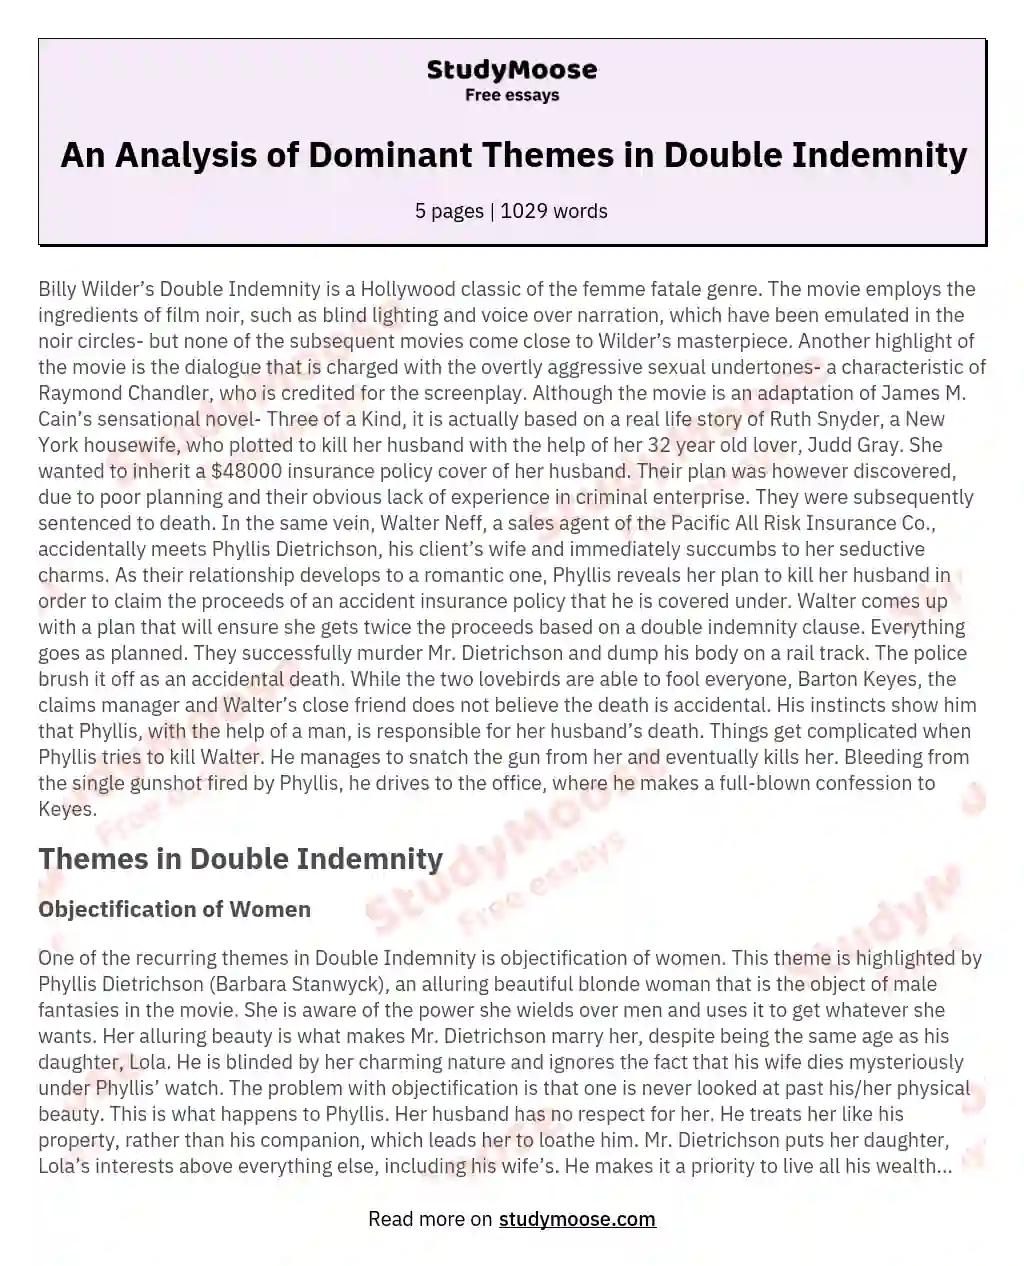 An Analysis of Dominant Themes in Double Indemnity